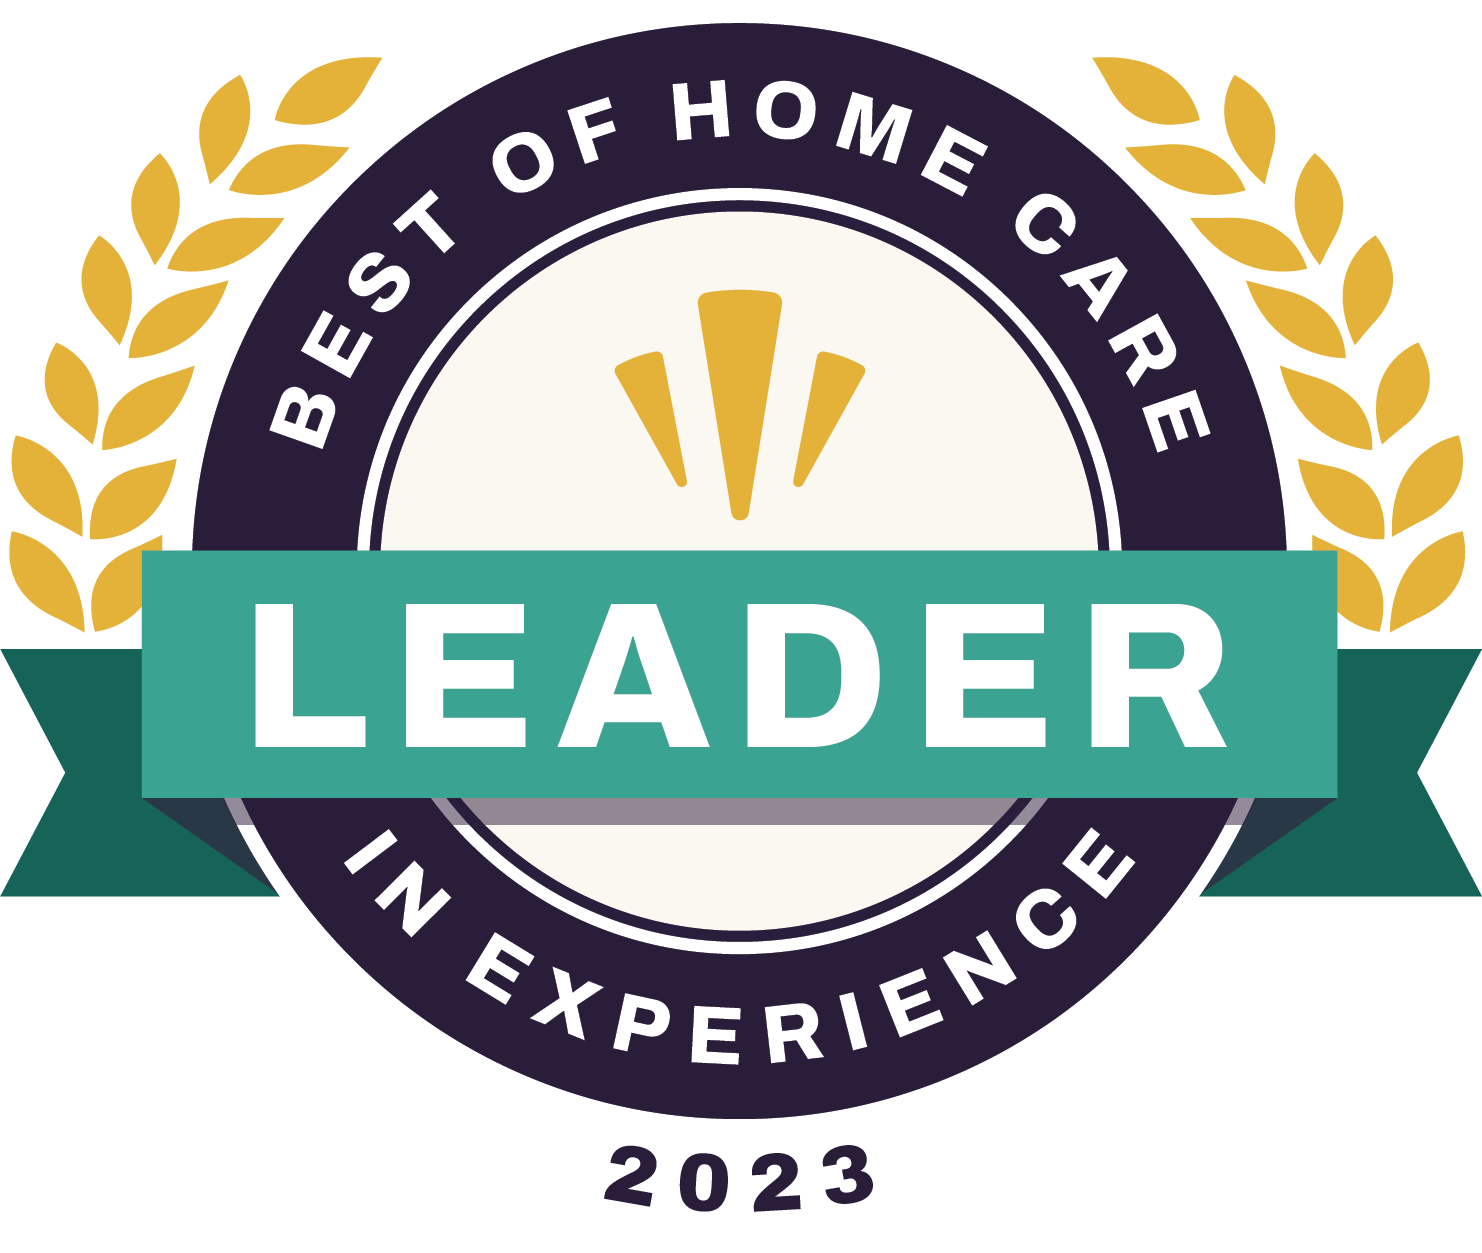 2023 Best of Home care Leader in Experience award